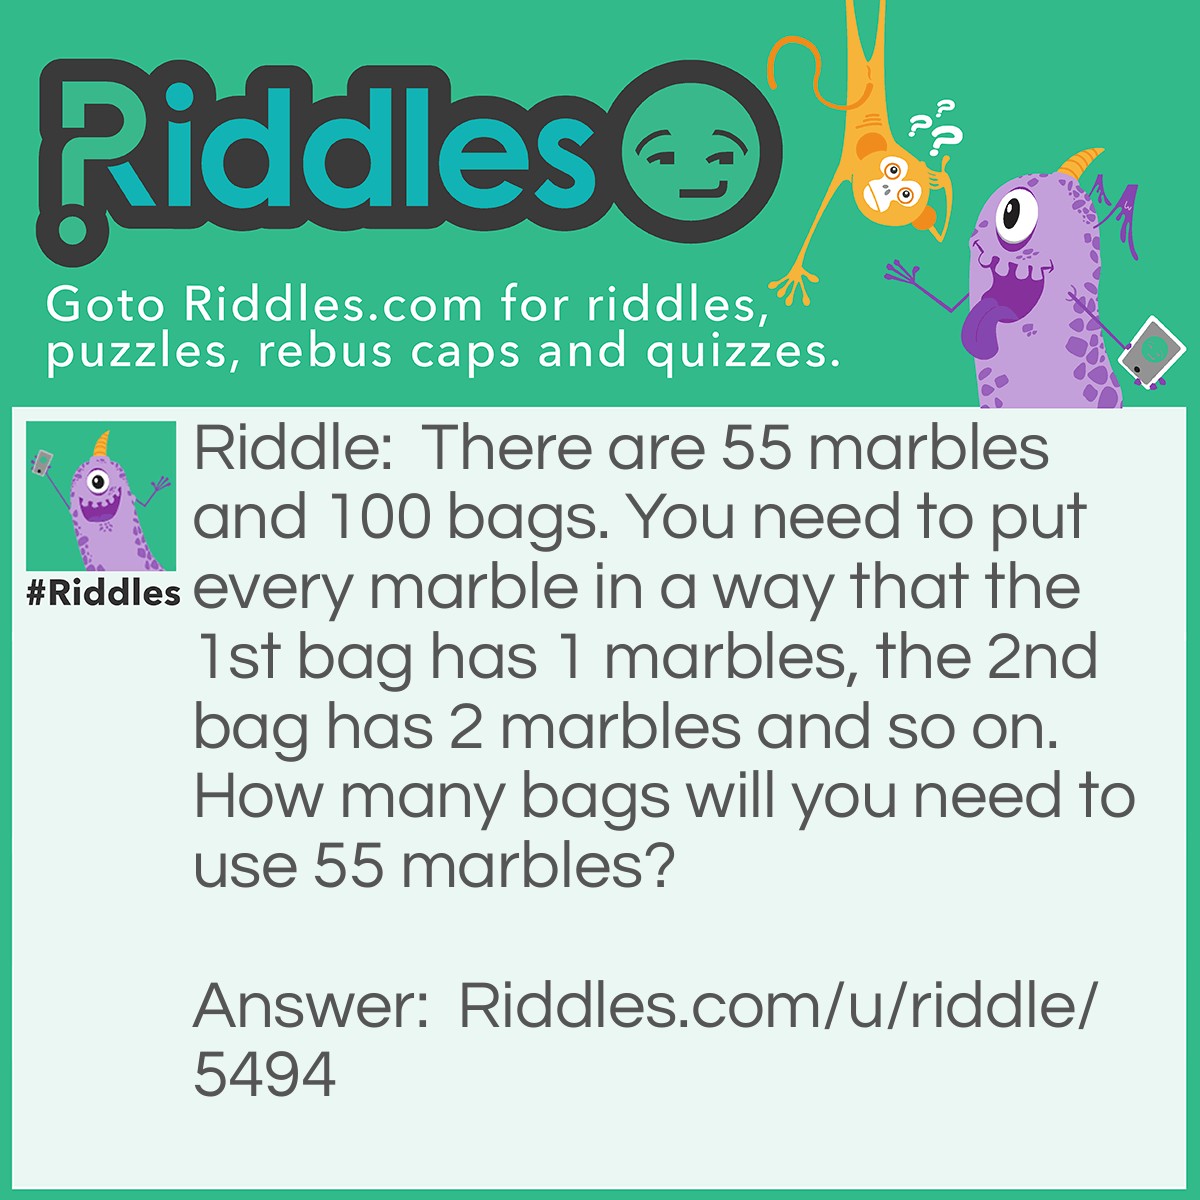 Riddle: There are 55 marbles and 100 bags. You need to put every marble in a way that the 1st bag has 1 marbles, the 2nd bag has 2 marbles and so on. How many bags will you need to use 55 marbles? Answer: 55 bags. Put a marble in the first bag then the bag goes in the second bag with 1 marble, making the second have 2 marbles. Repeat this until use 55 marbles, in total,the 55th bag has 55 marbles.